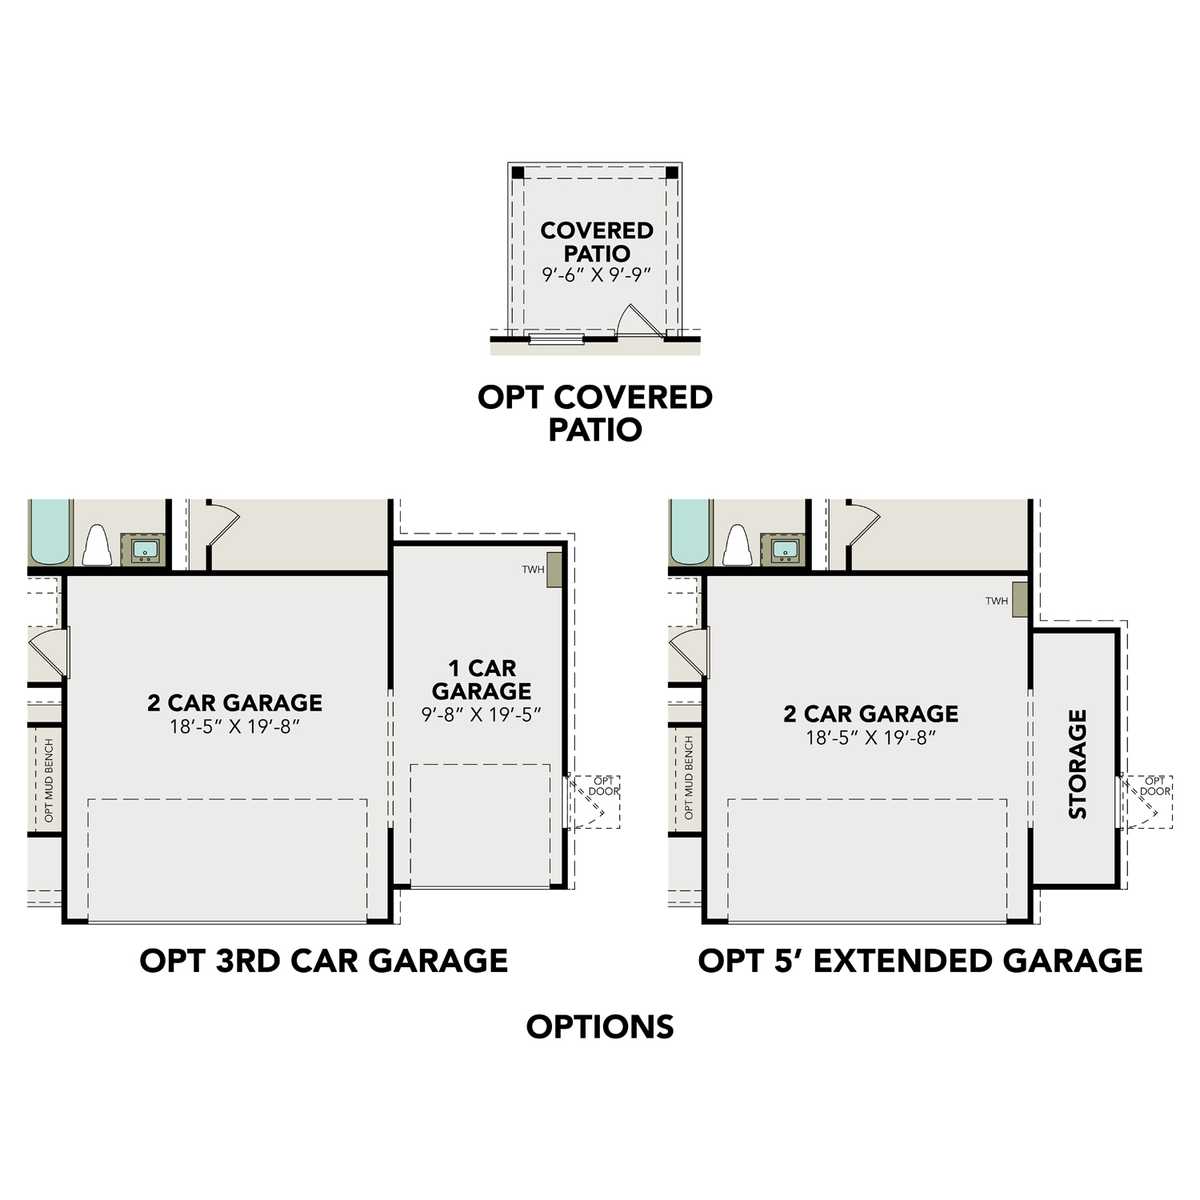 2 - The Frio F buildable floor plan layout in Davidson Homes' Liberty Estates community.